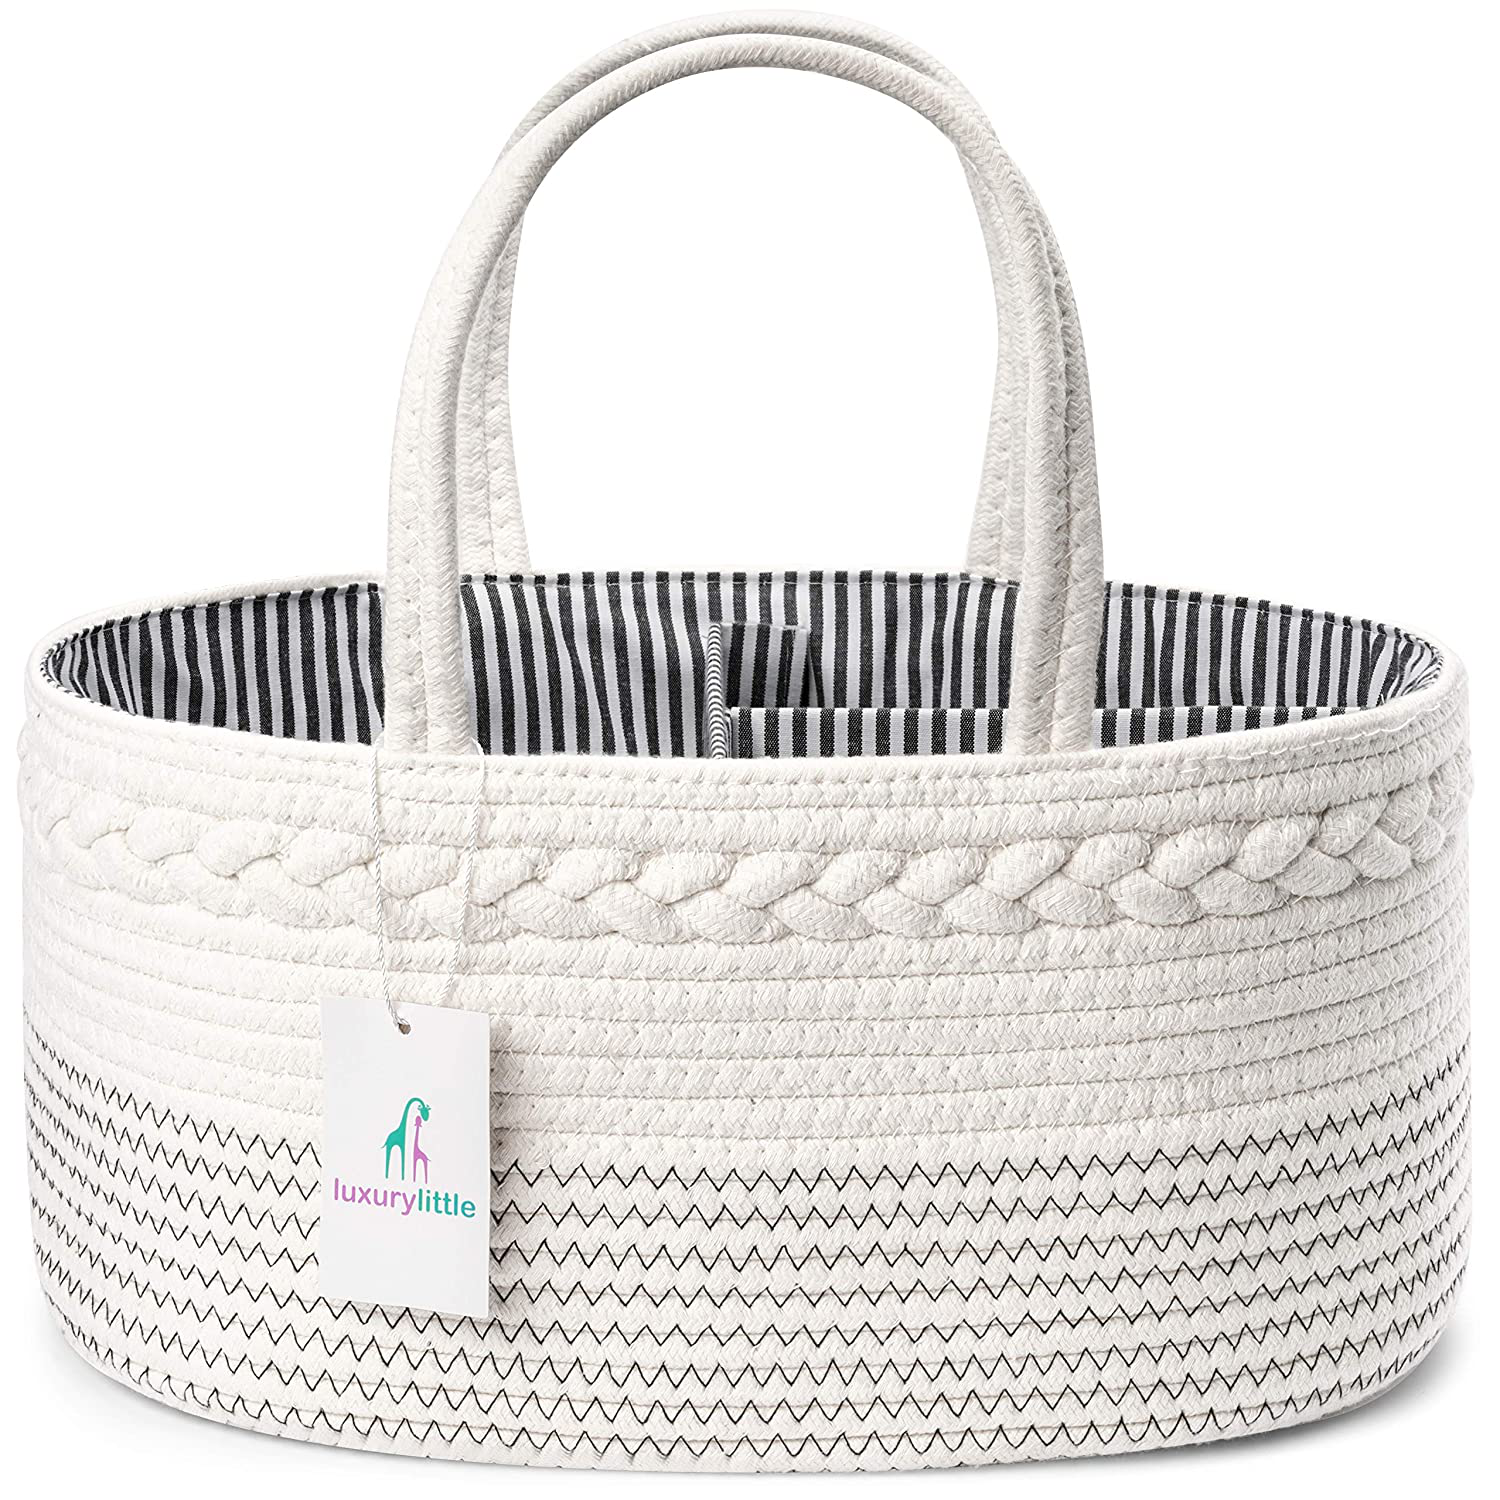 Luxury Little Baby Diaper Caddy Organizer - Rope Nursery Storage Bin for Boys and Girls - Large Tote Bag & Car Organizer with Removable Inserts - Baby Shower Gift Basket - Newborn Registry Must Haves